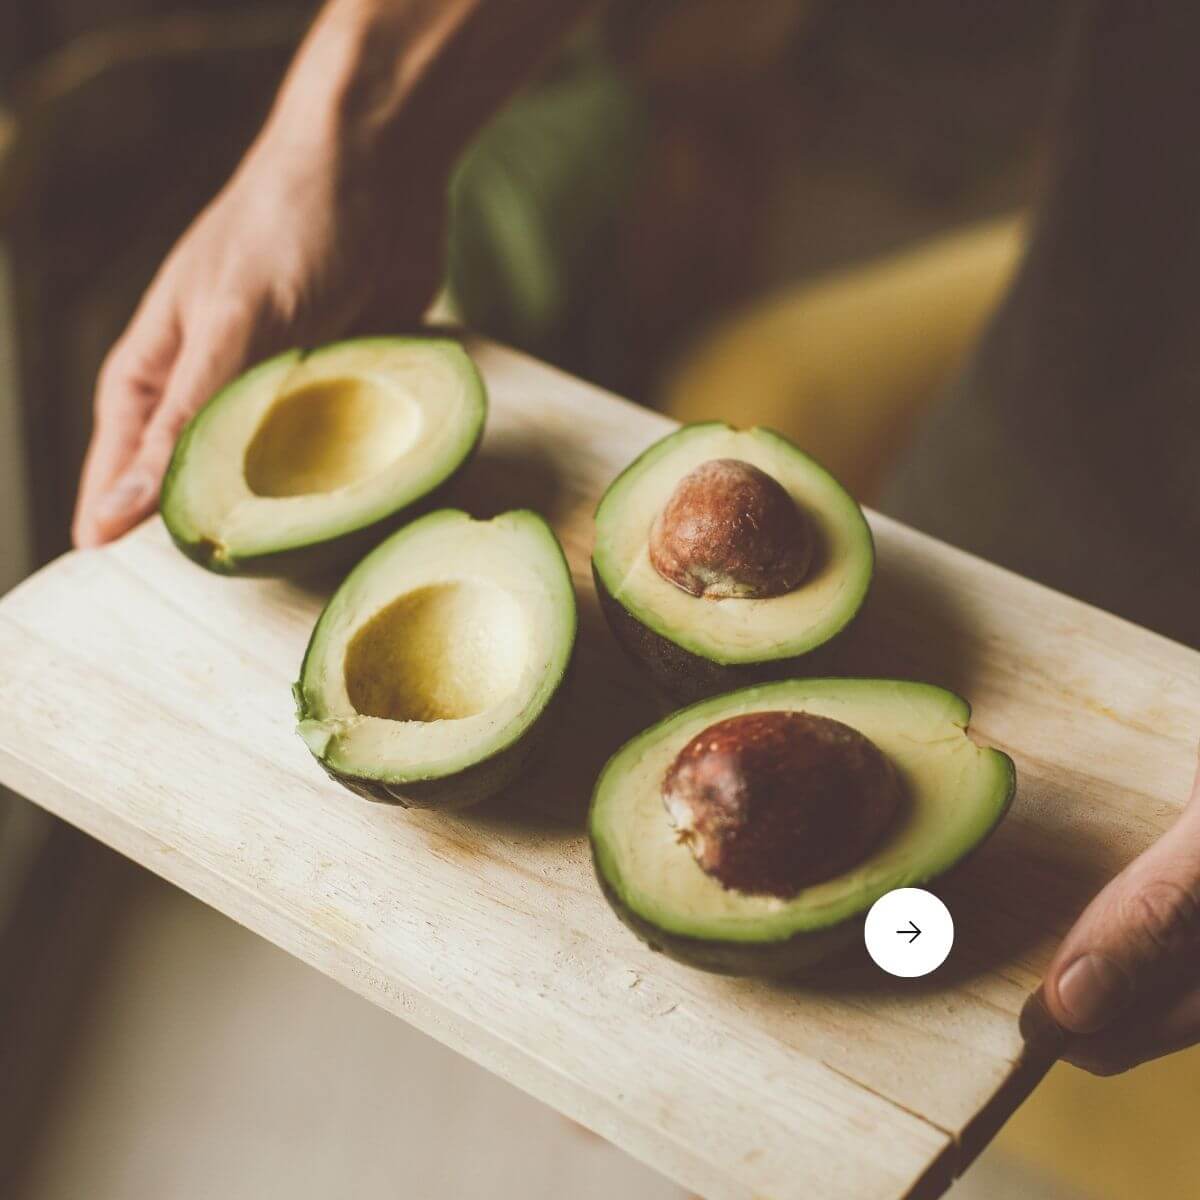 Avocados are a great memory boosting super food for the brain.